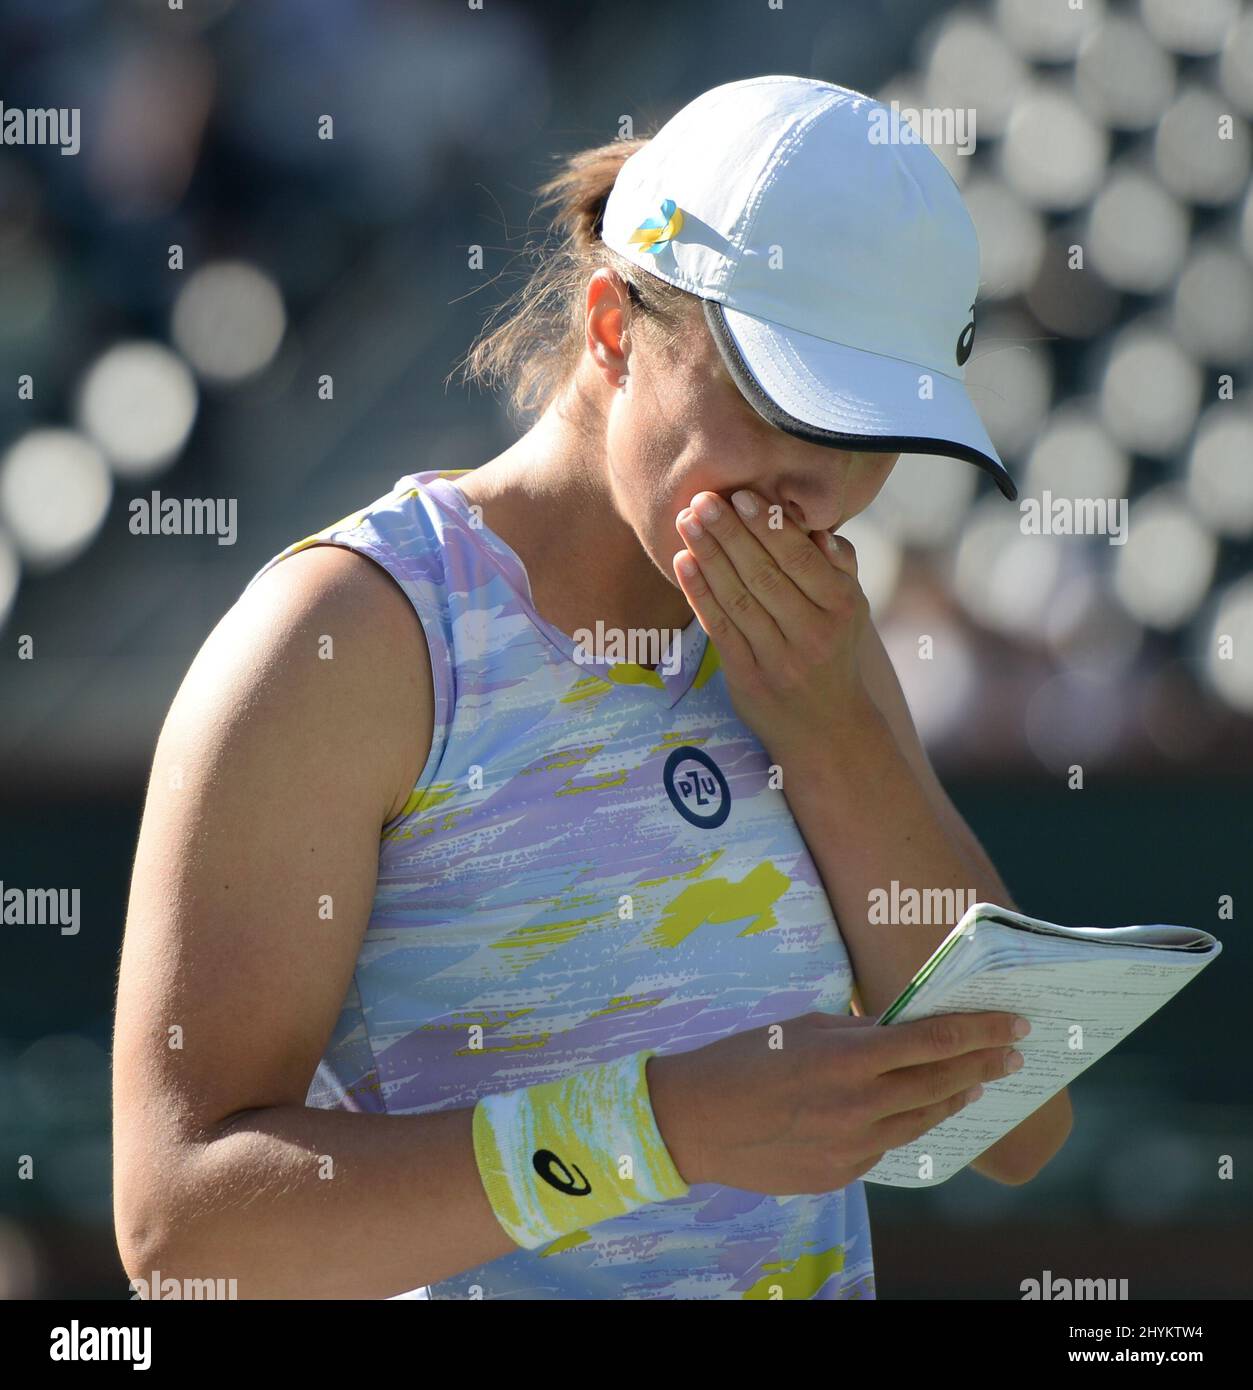 Iga Swiatek (POL) defeated Clara Tauson (DEN) 6-7 (3-7), 6-2, 6-1, at the BNP Paribas Open being played at Indian Wells Tennis Garden in Indian Wells, California on March 13, 2022 ©